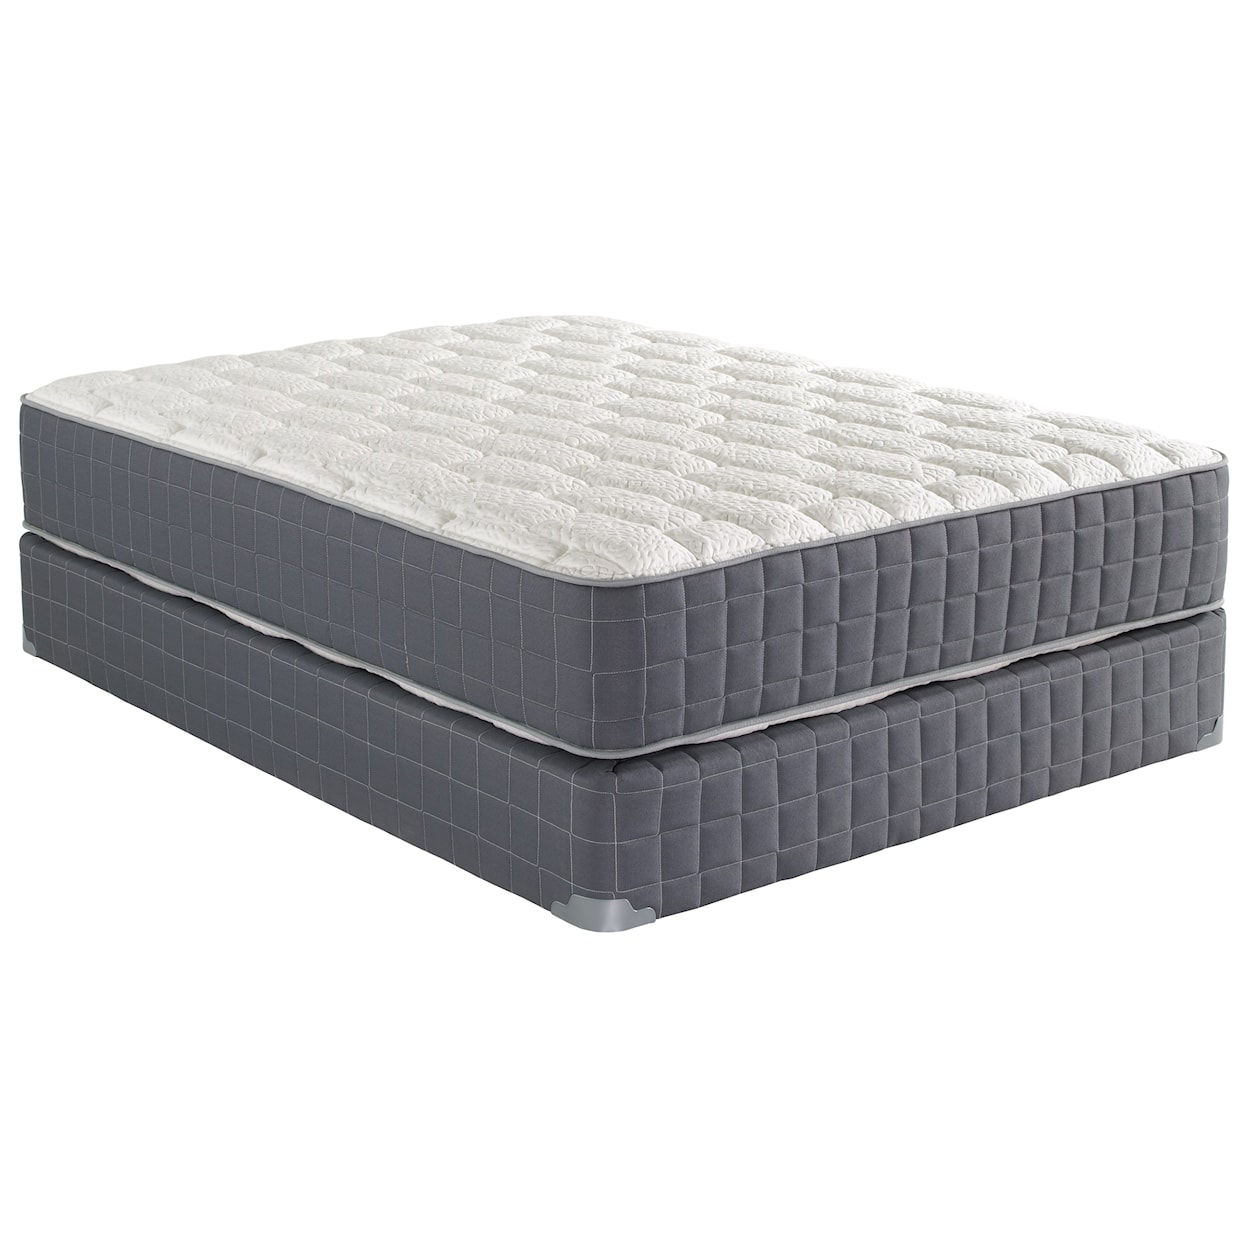 Spring Air Heritage I Full 12" Two Sided Mattress Set